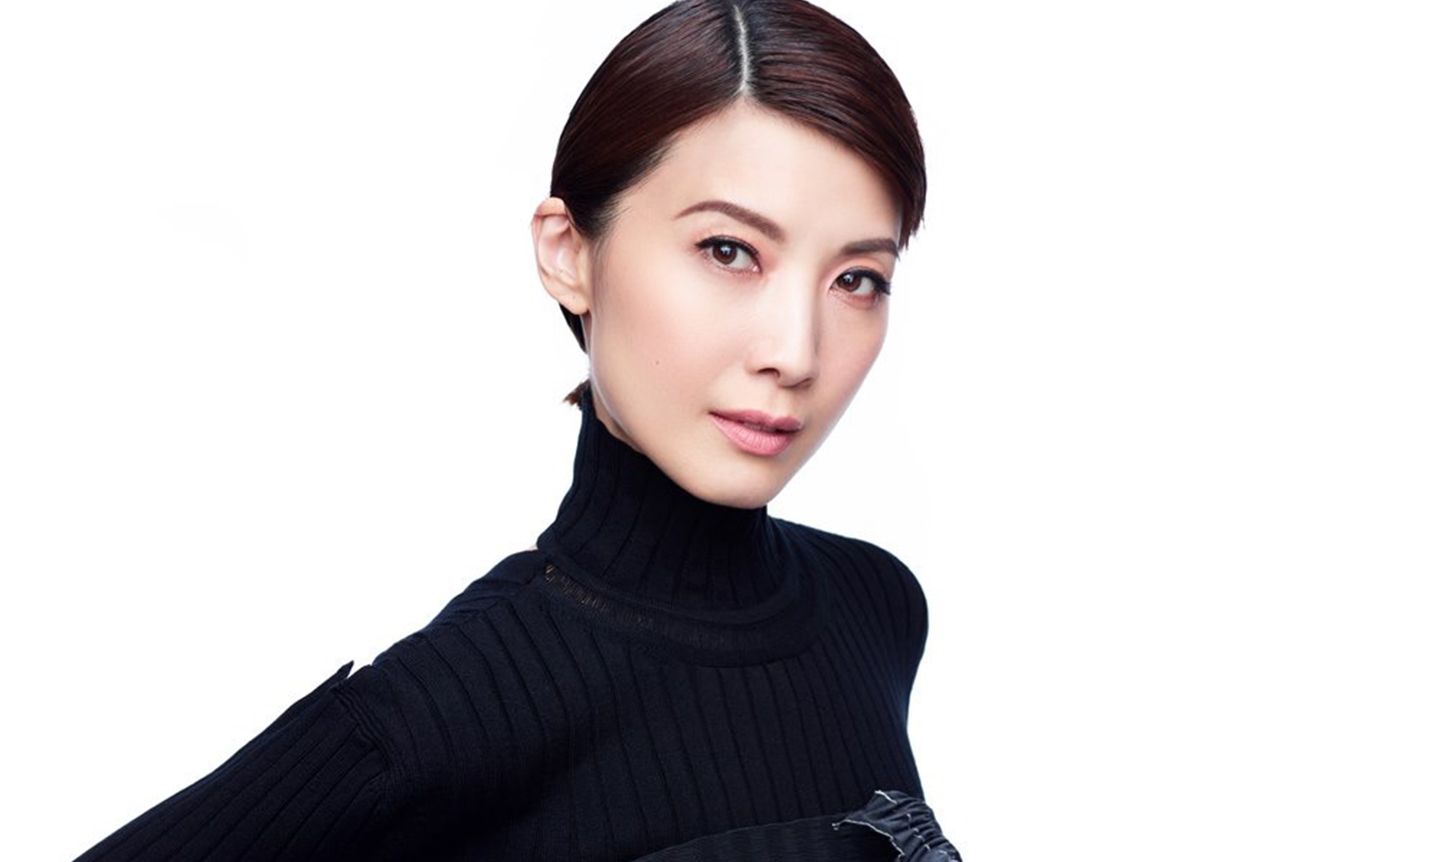 Jeanette aw